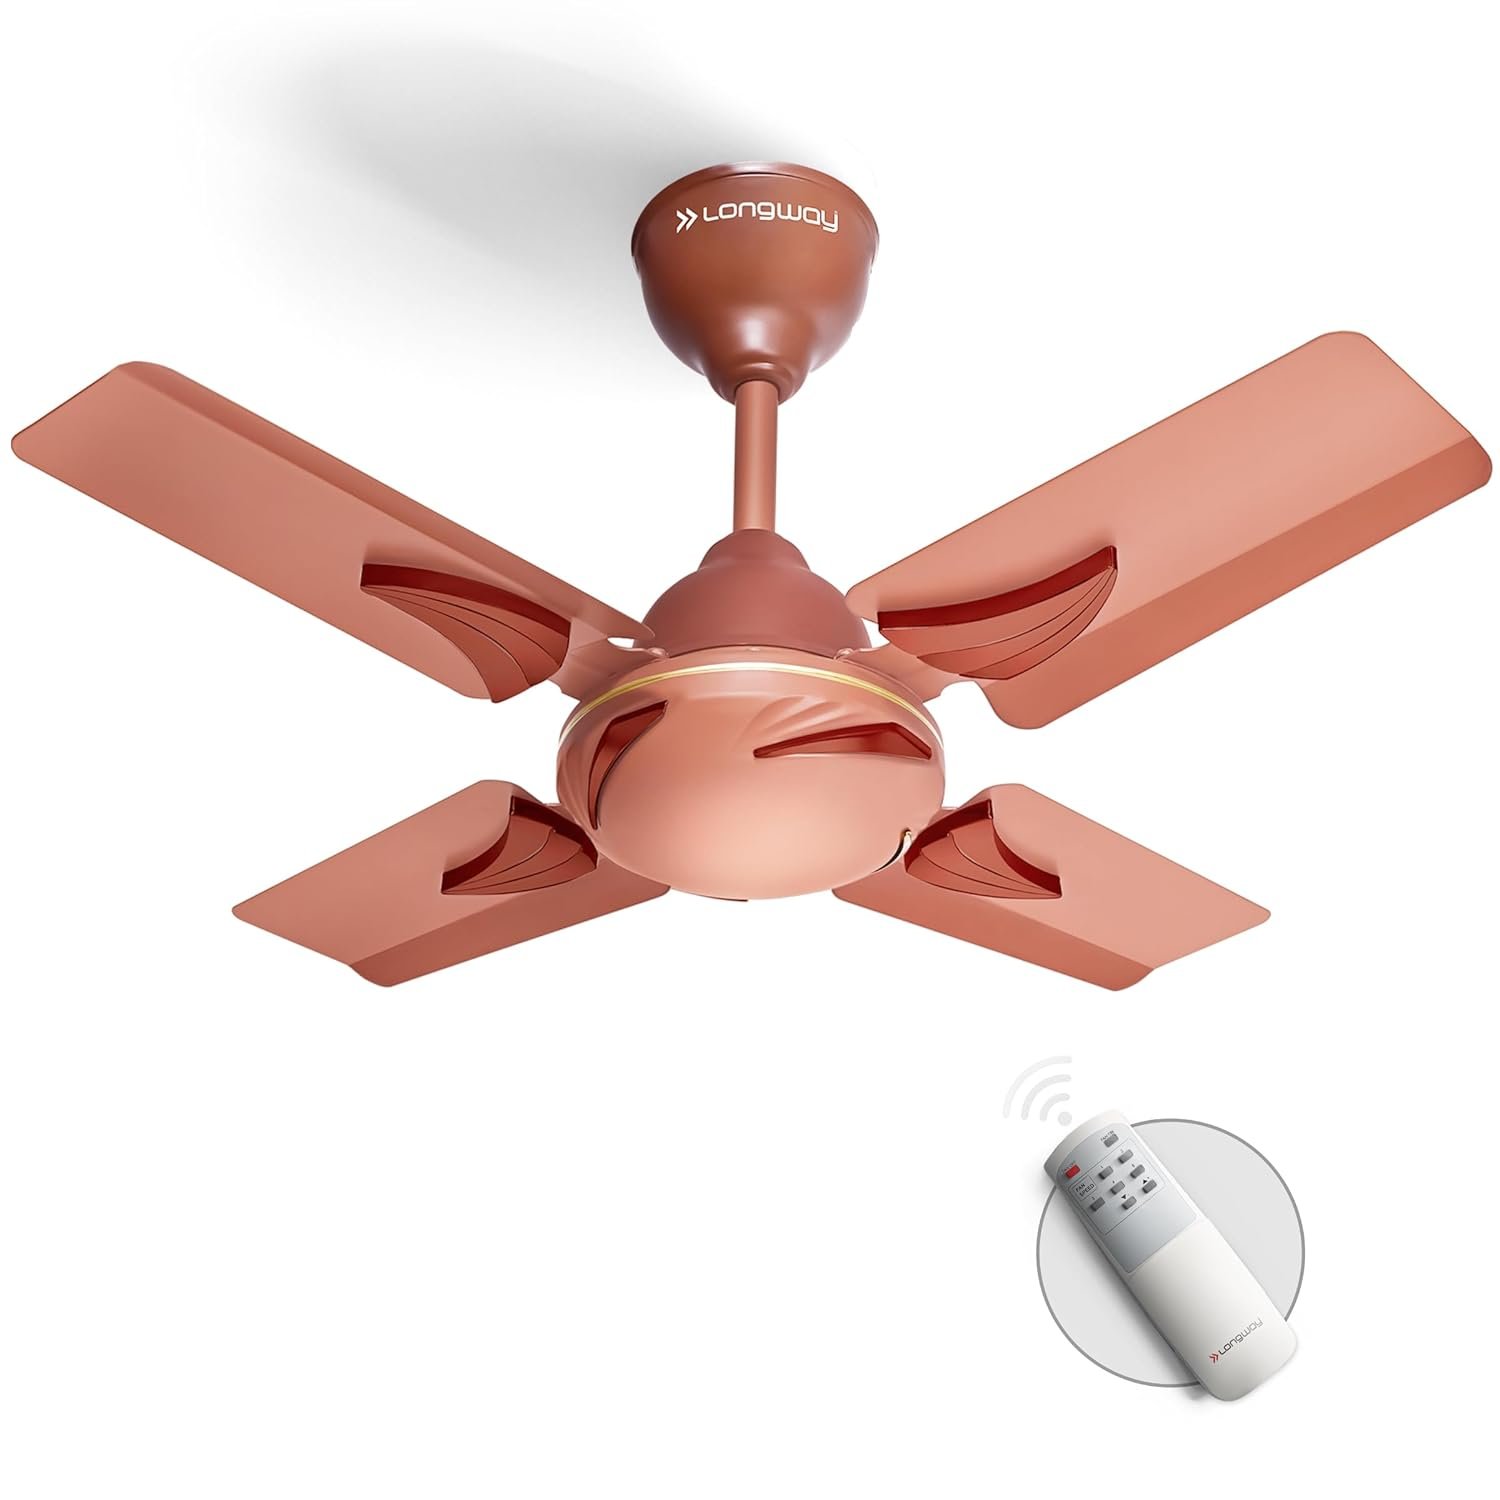 LONGWAY Creta P1 600 mm/24 inch Ultra High Speed 4 Blade Anti-Dust Decorative Star Rated Remote Controlled Ceiling Fan 2 Year Warranty (Rusty Brown, Pack of 1)